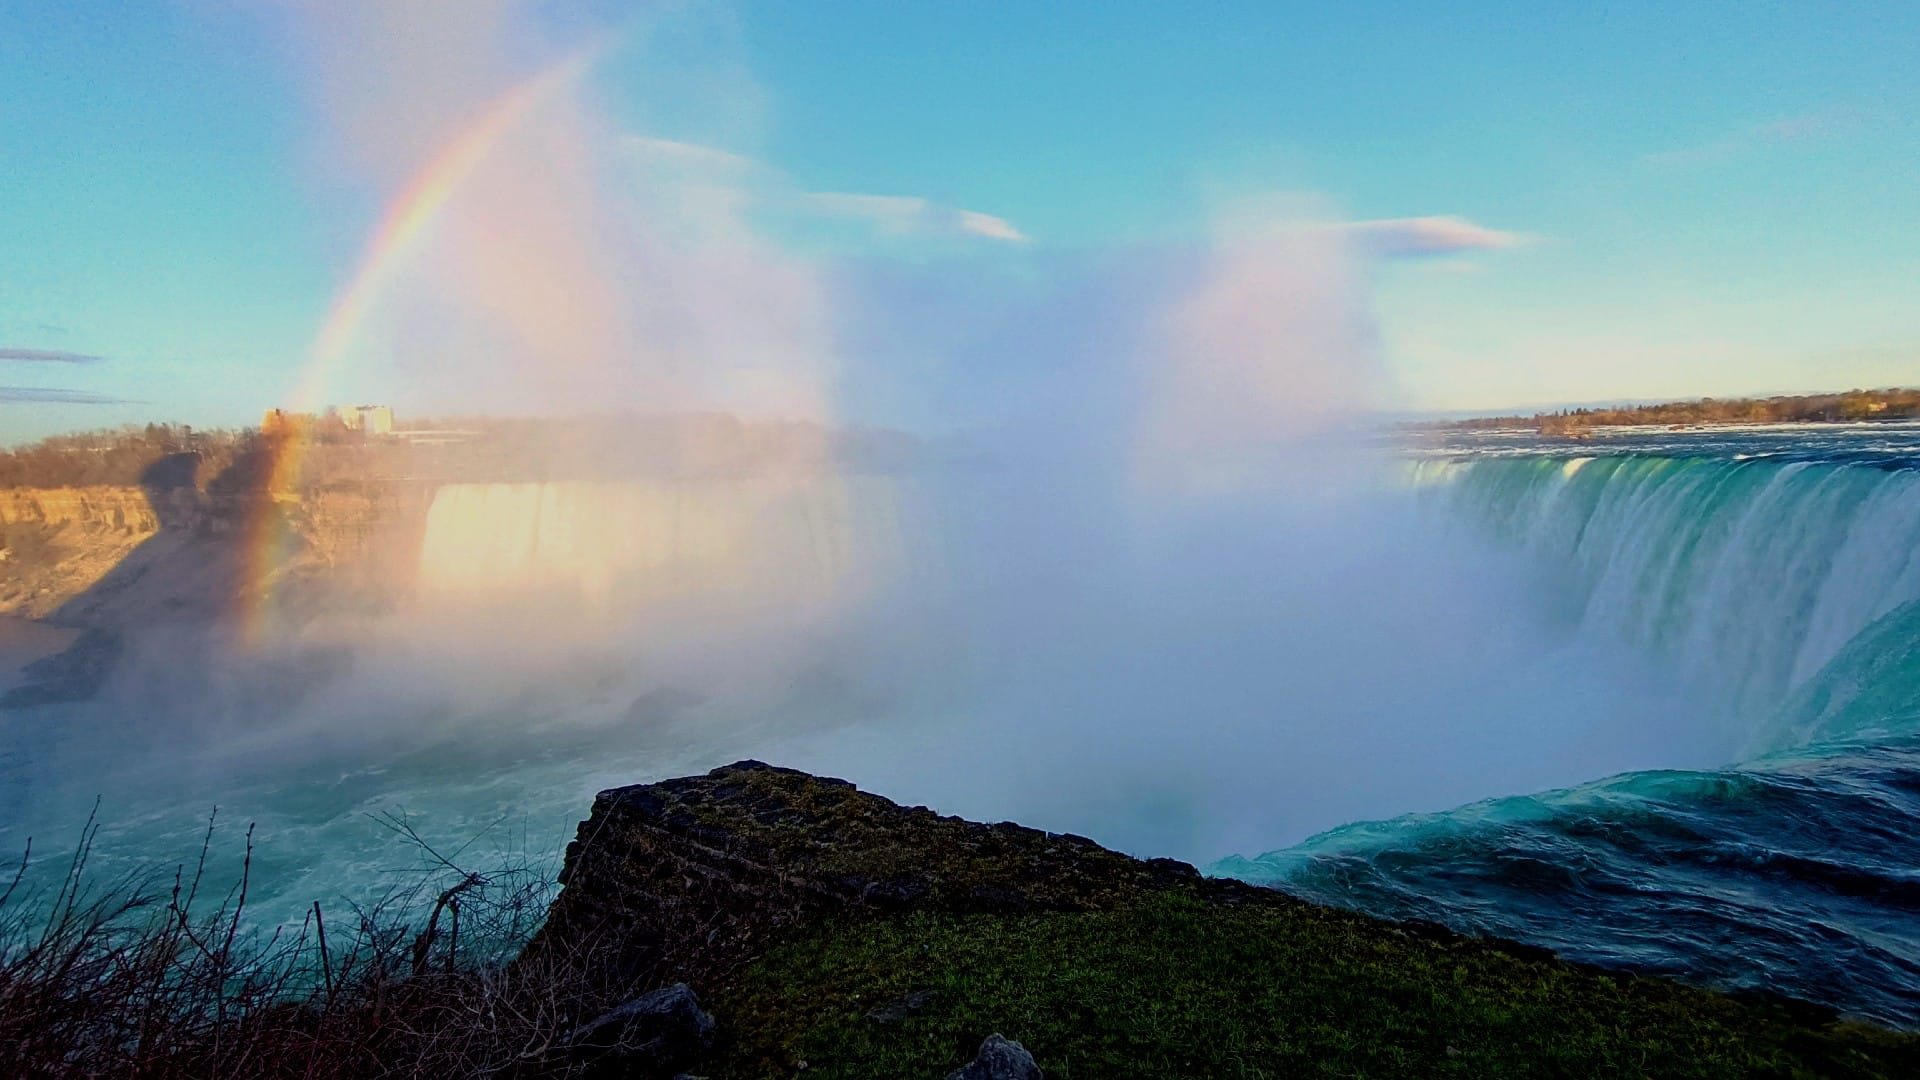 Located on a cliff overlooking Horseshoe —or Canadian— Falls, the aptly titled district of Fallsview is the number one best area to stay in Niagara Falls